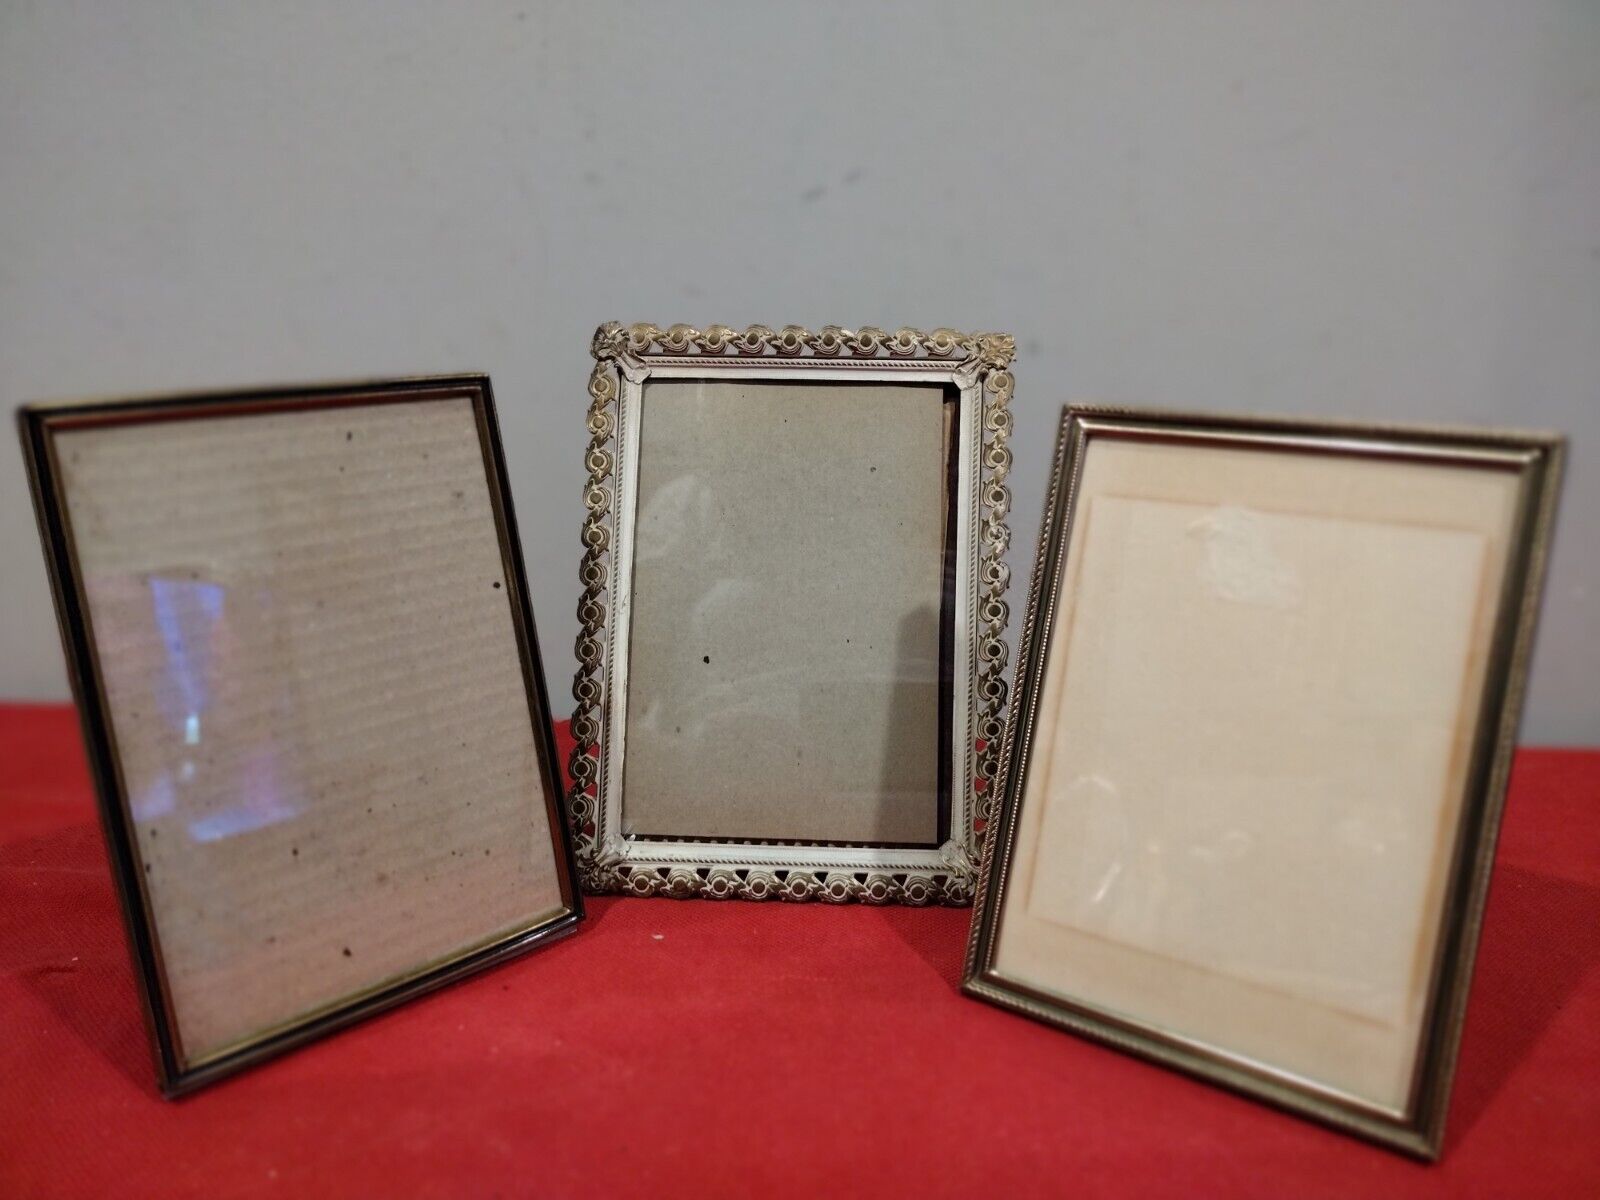 Lot Of 3 - Vintage Metal Picture Frames Fits Photo Size 5x7 Easel  w/ Glass